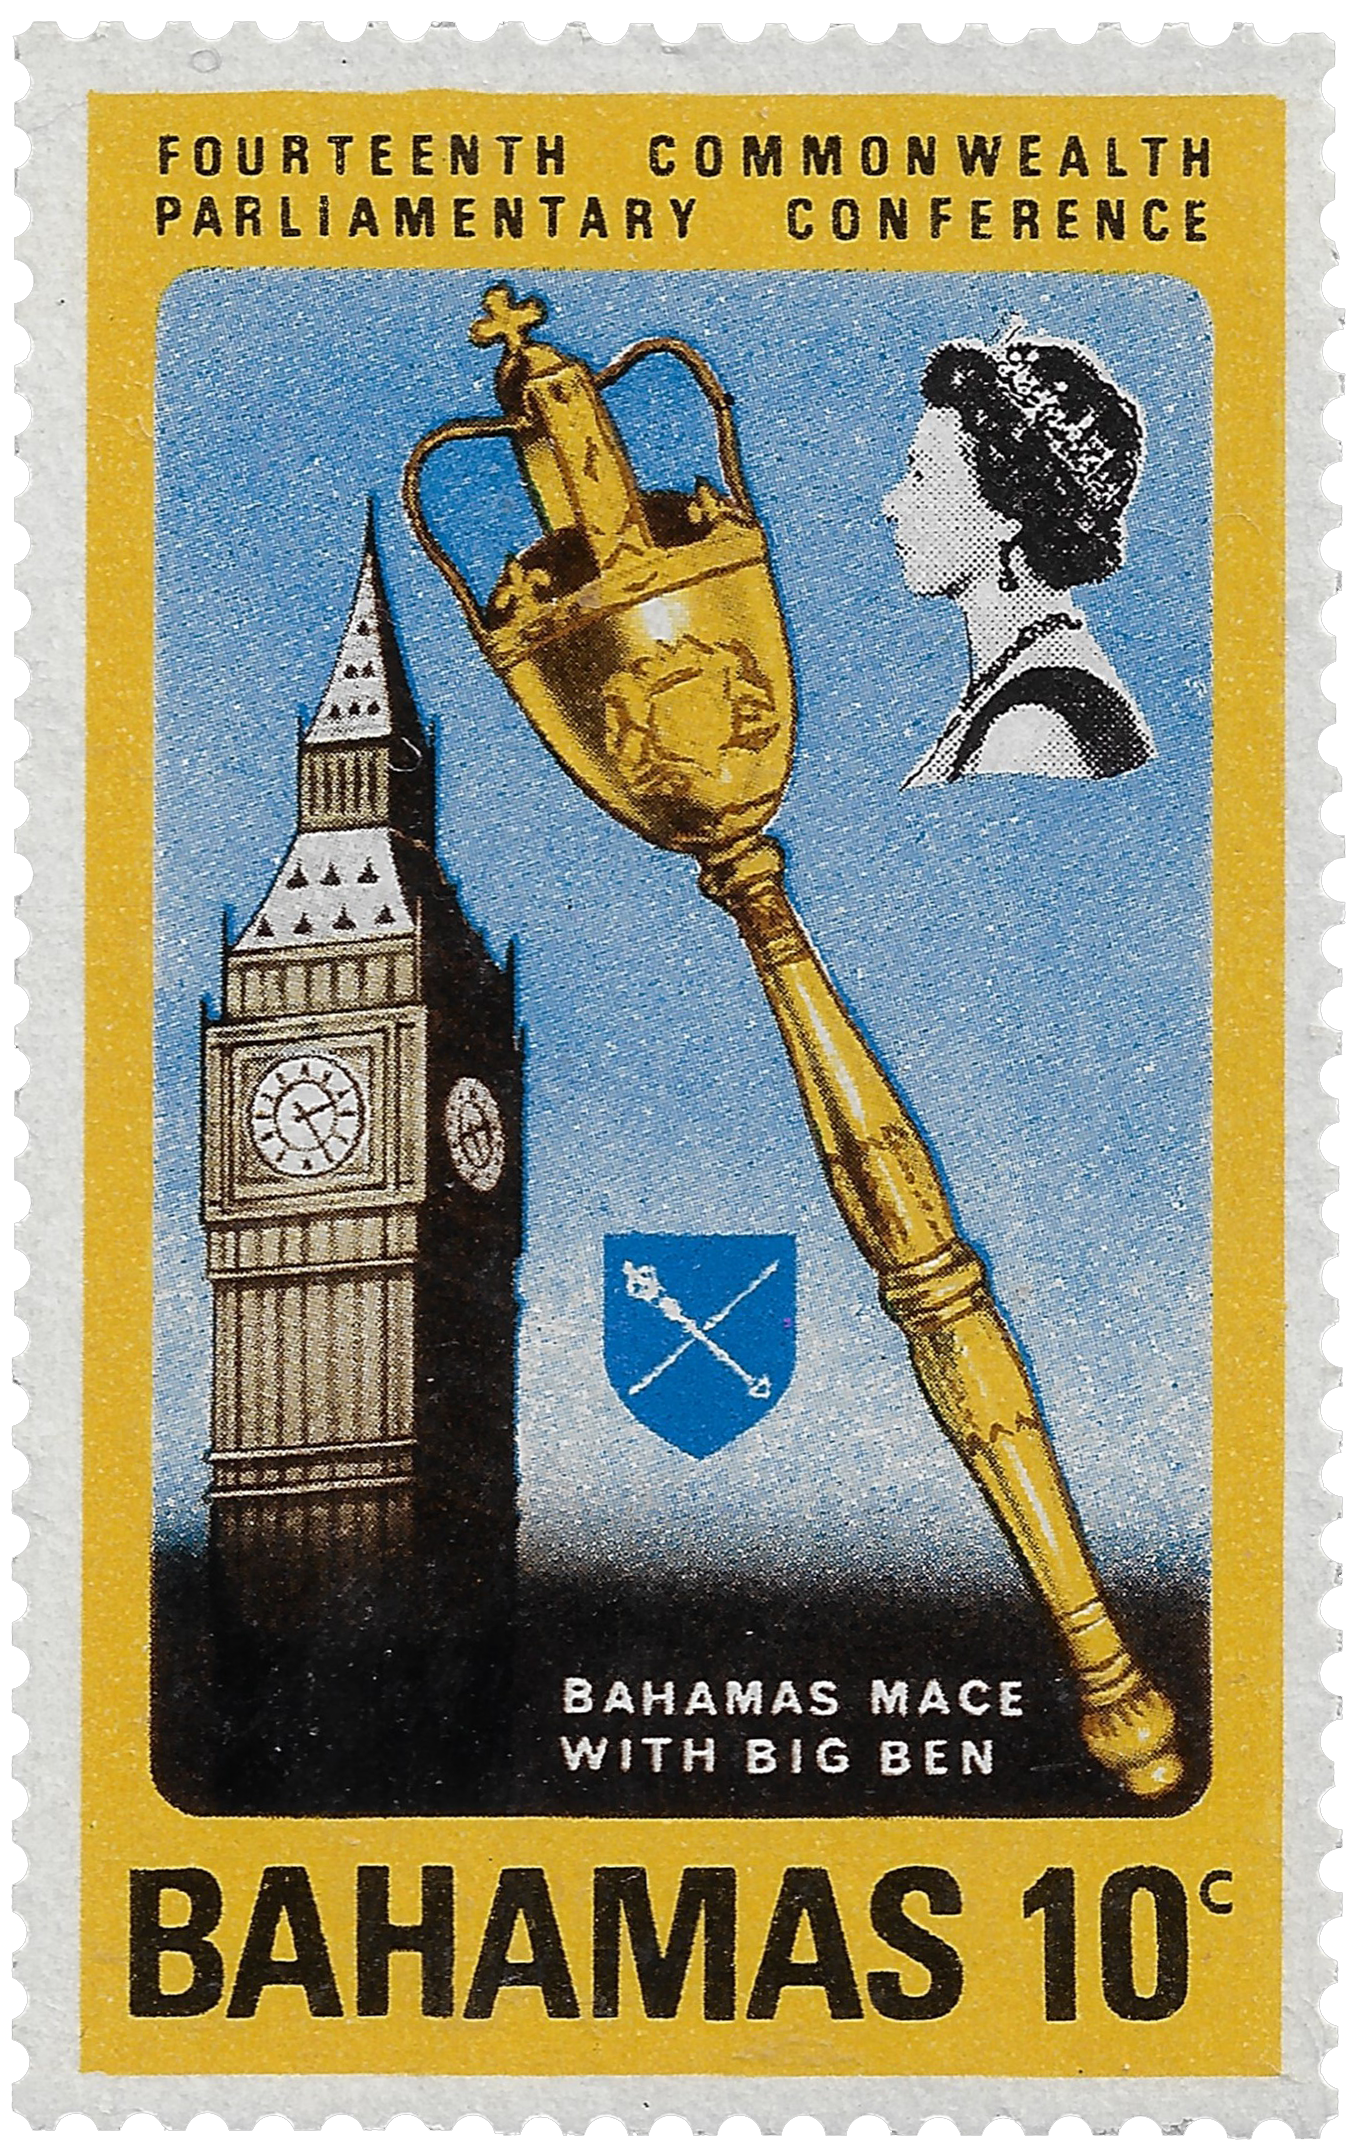 10c 1968, Fourteenth Commonwealth Parliamentary Conference, Bahamas Mace with Big Ben